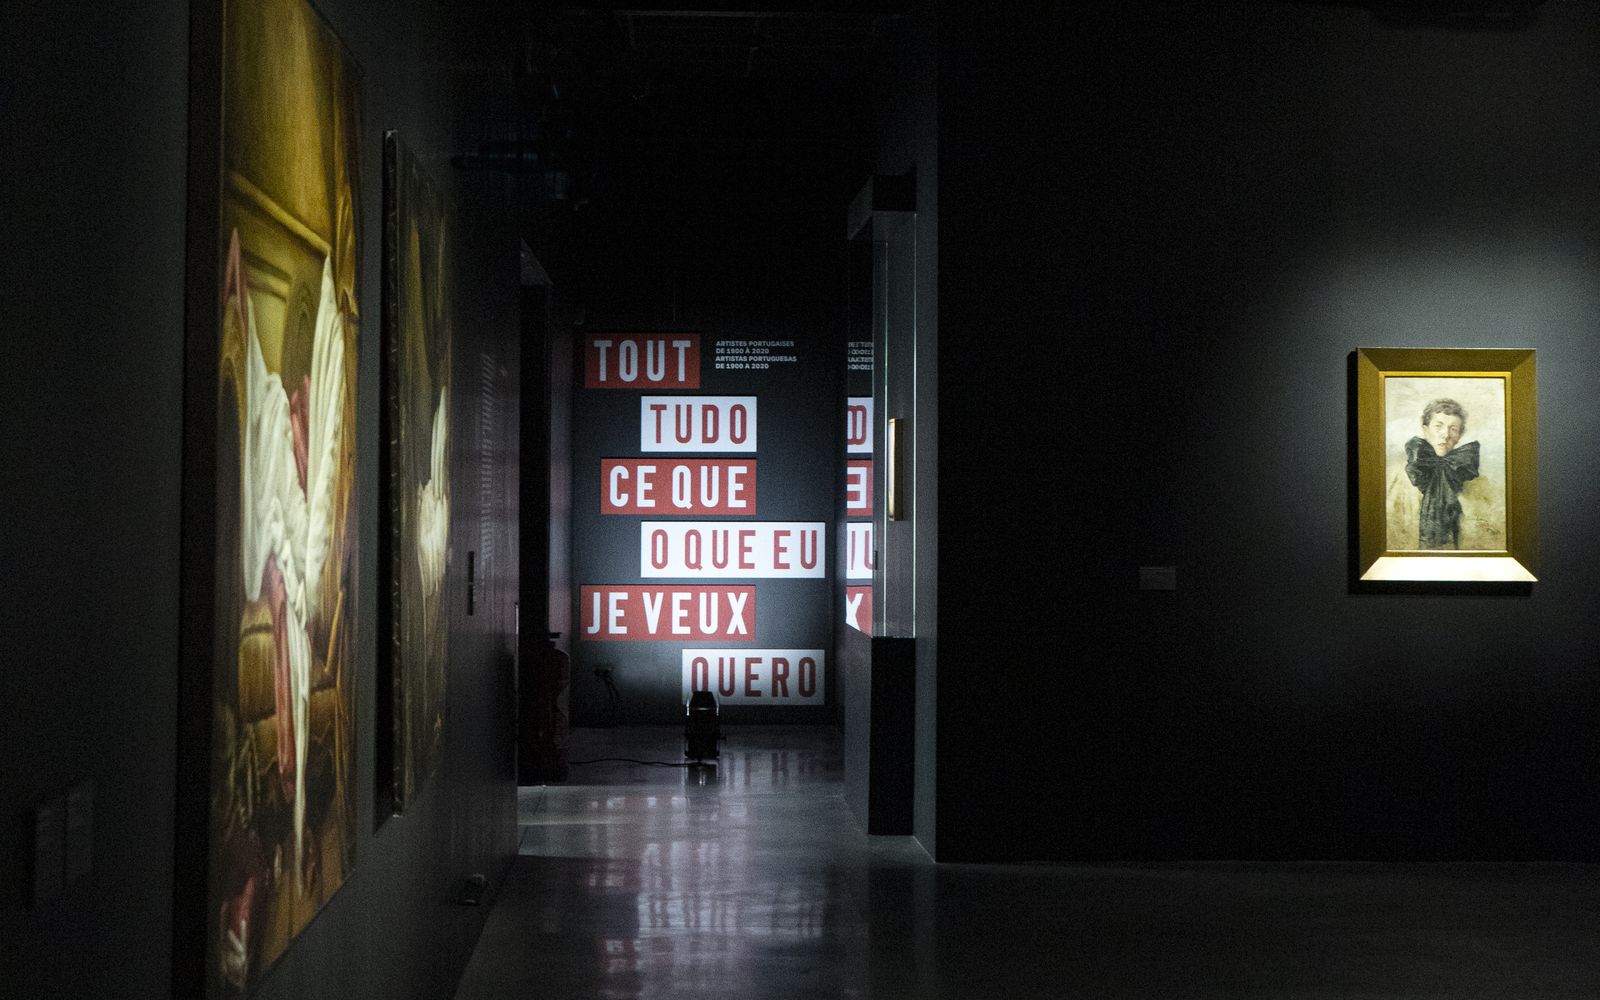 Vue from the exhibition "All I Want. Portuguese Women Artists from 1900 to 2020" at CCC OD, Tours, France. March 2022. ©ChangeisgoodParis